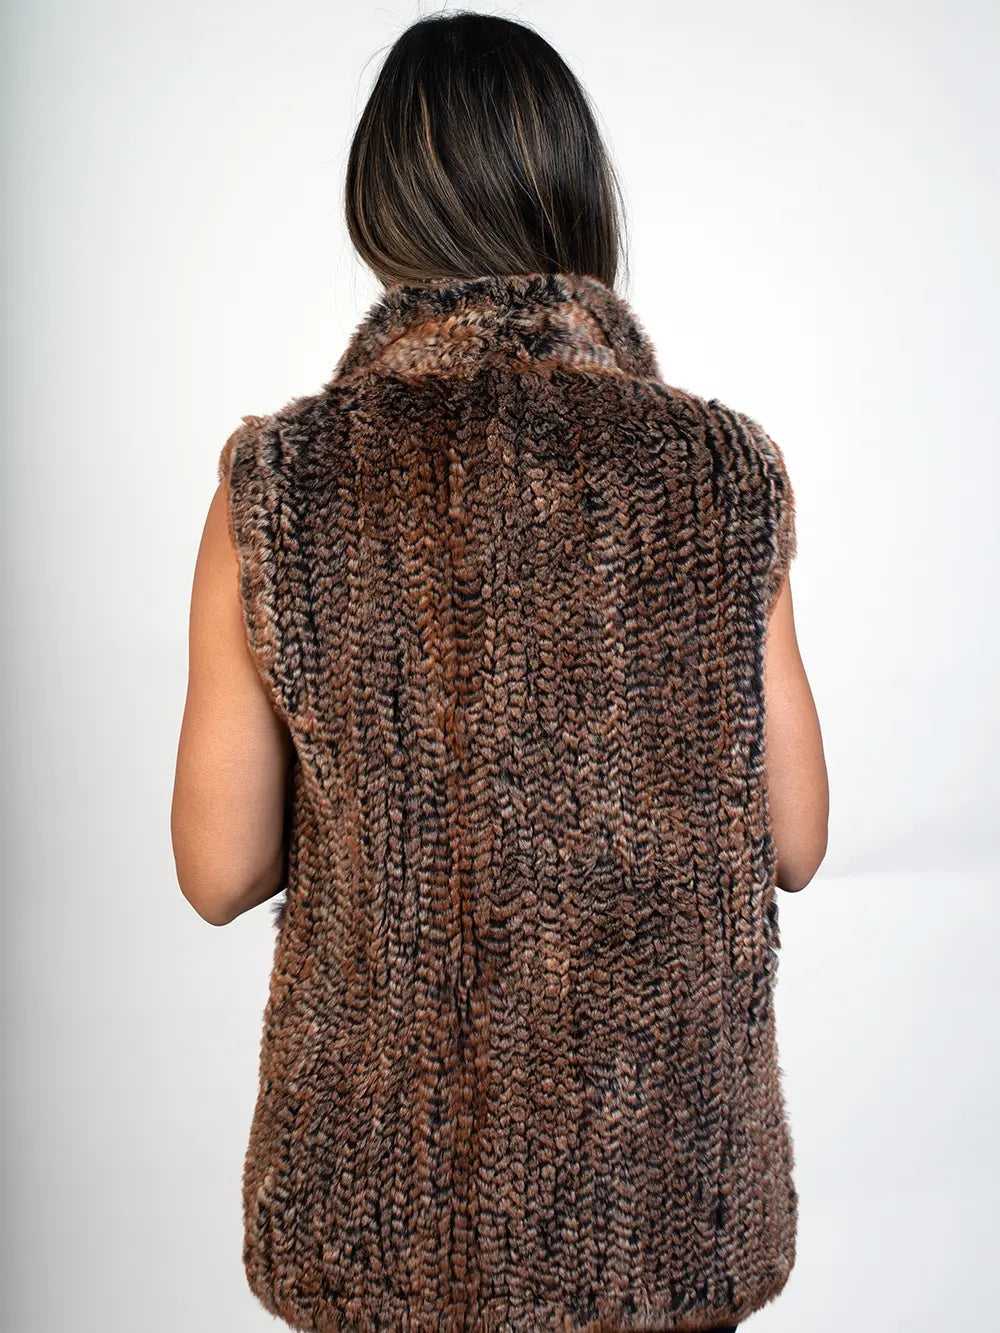 LaBelle Since 1919 Brown Knitted Rex Rabbit Vest